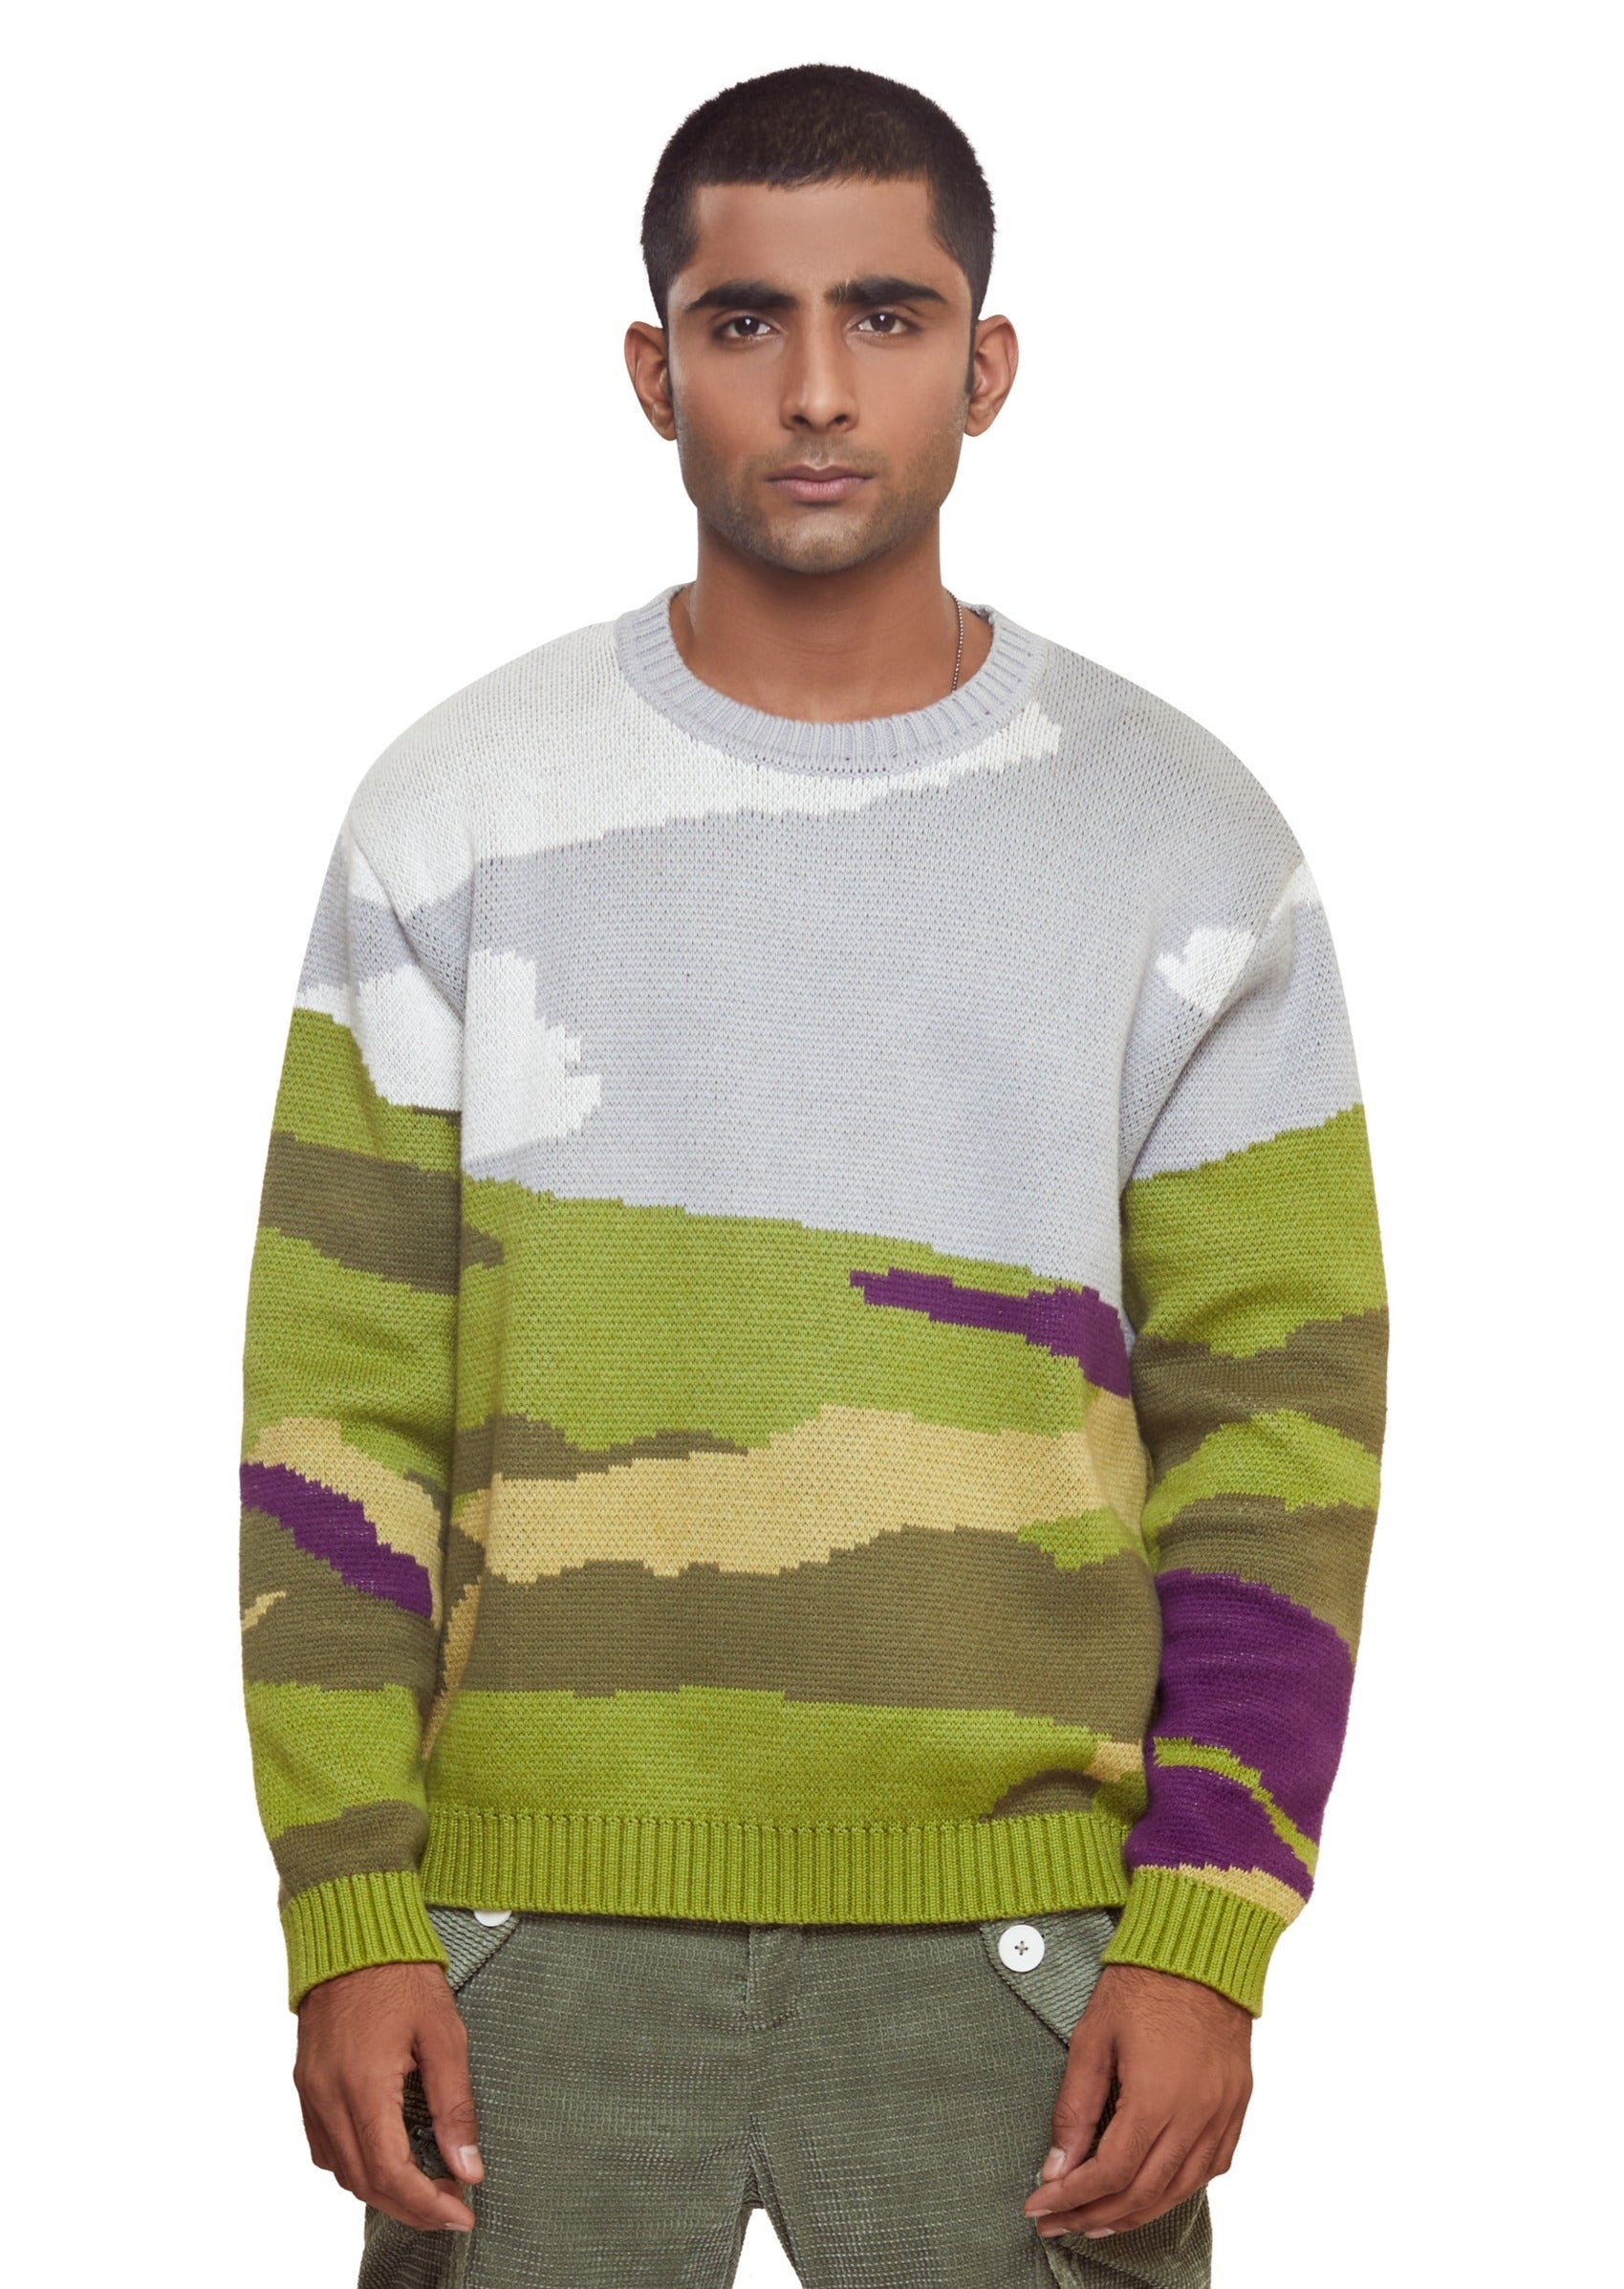 Green and blue cotton Spring Valley Knit Jumper from the brand Yitai